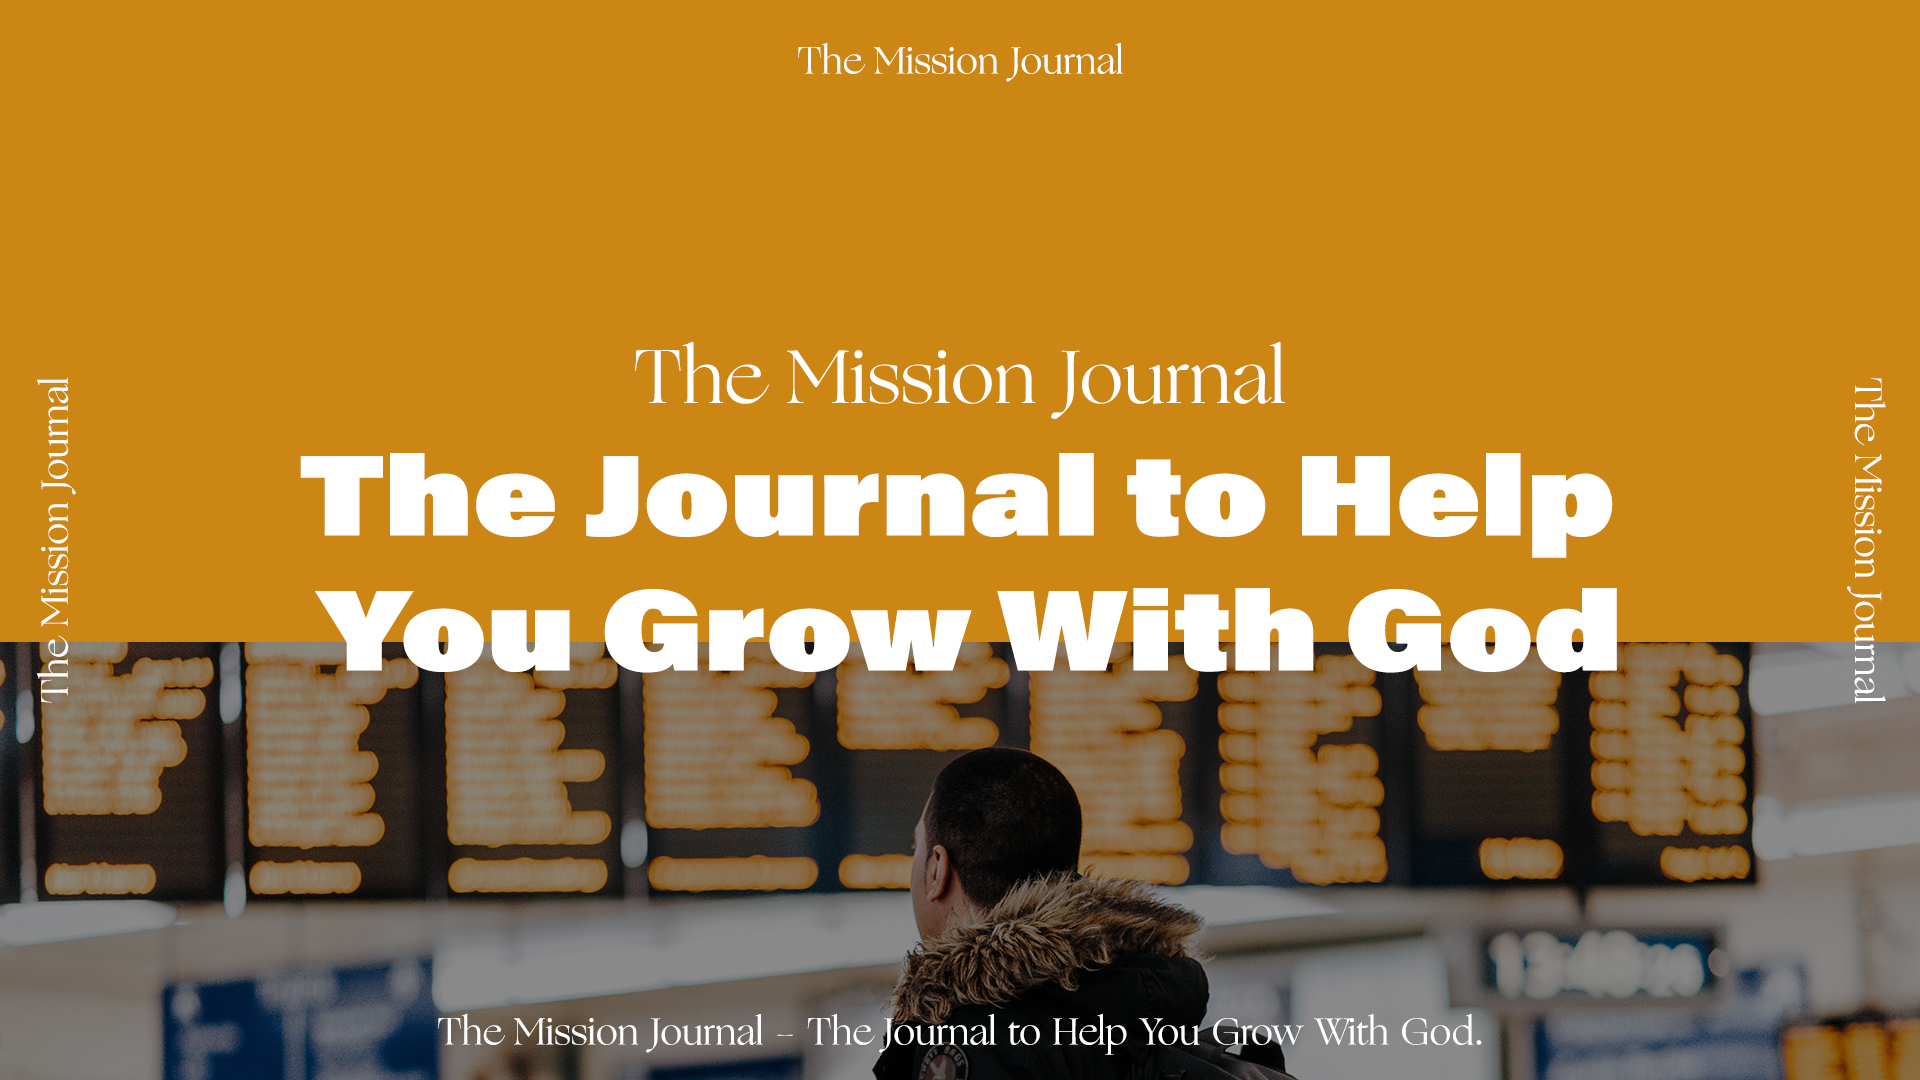 Mission Trip JournalThe Mission Journal - The Journal to Help You Grow With God.jpg